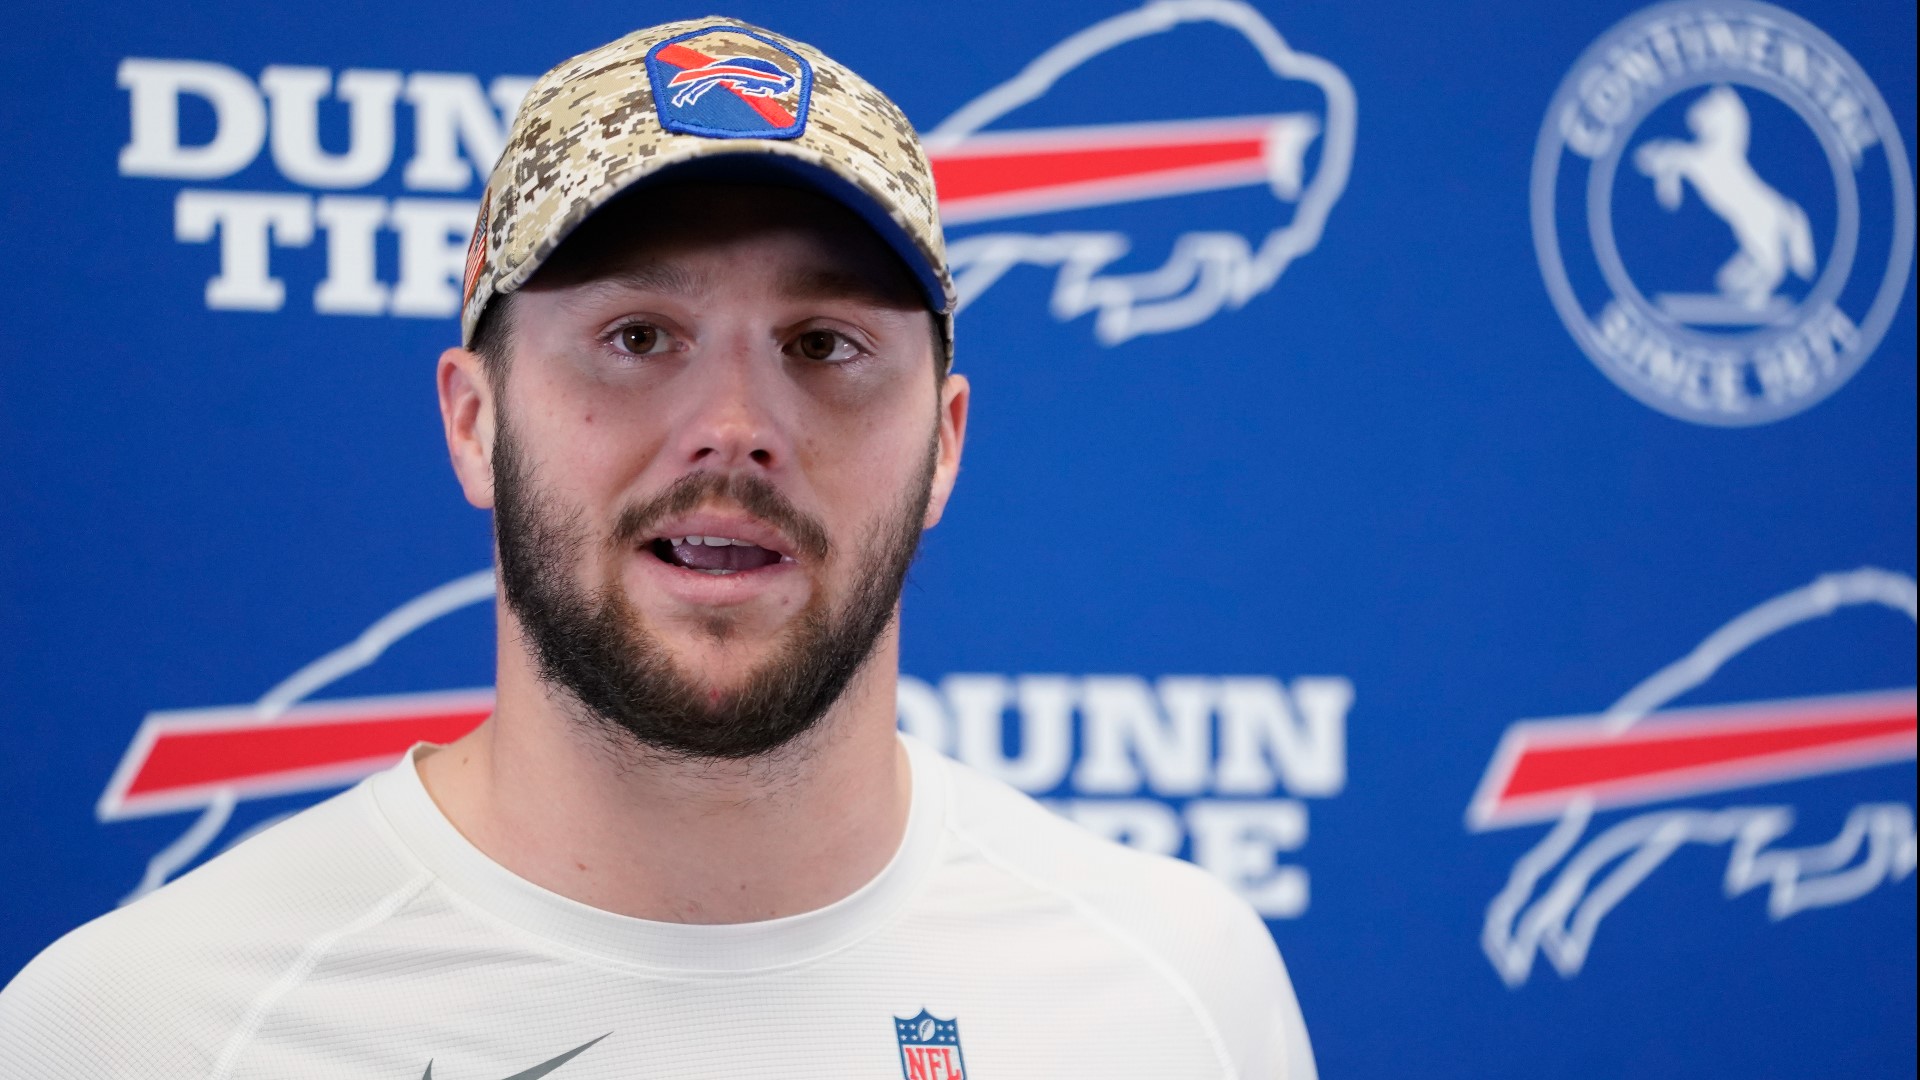 Bills postgame reaction: Josh Allen discusses the 20-17 Bills victory in Kansas City against the Chiefs.